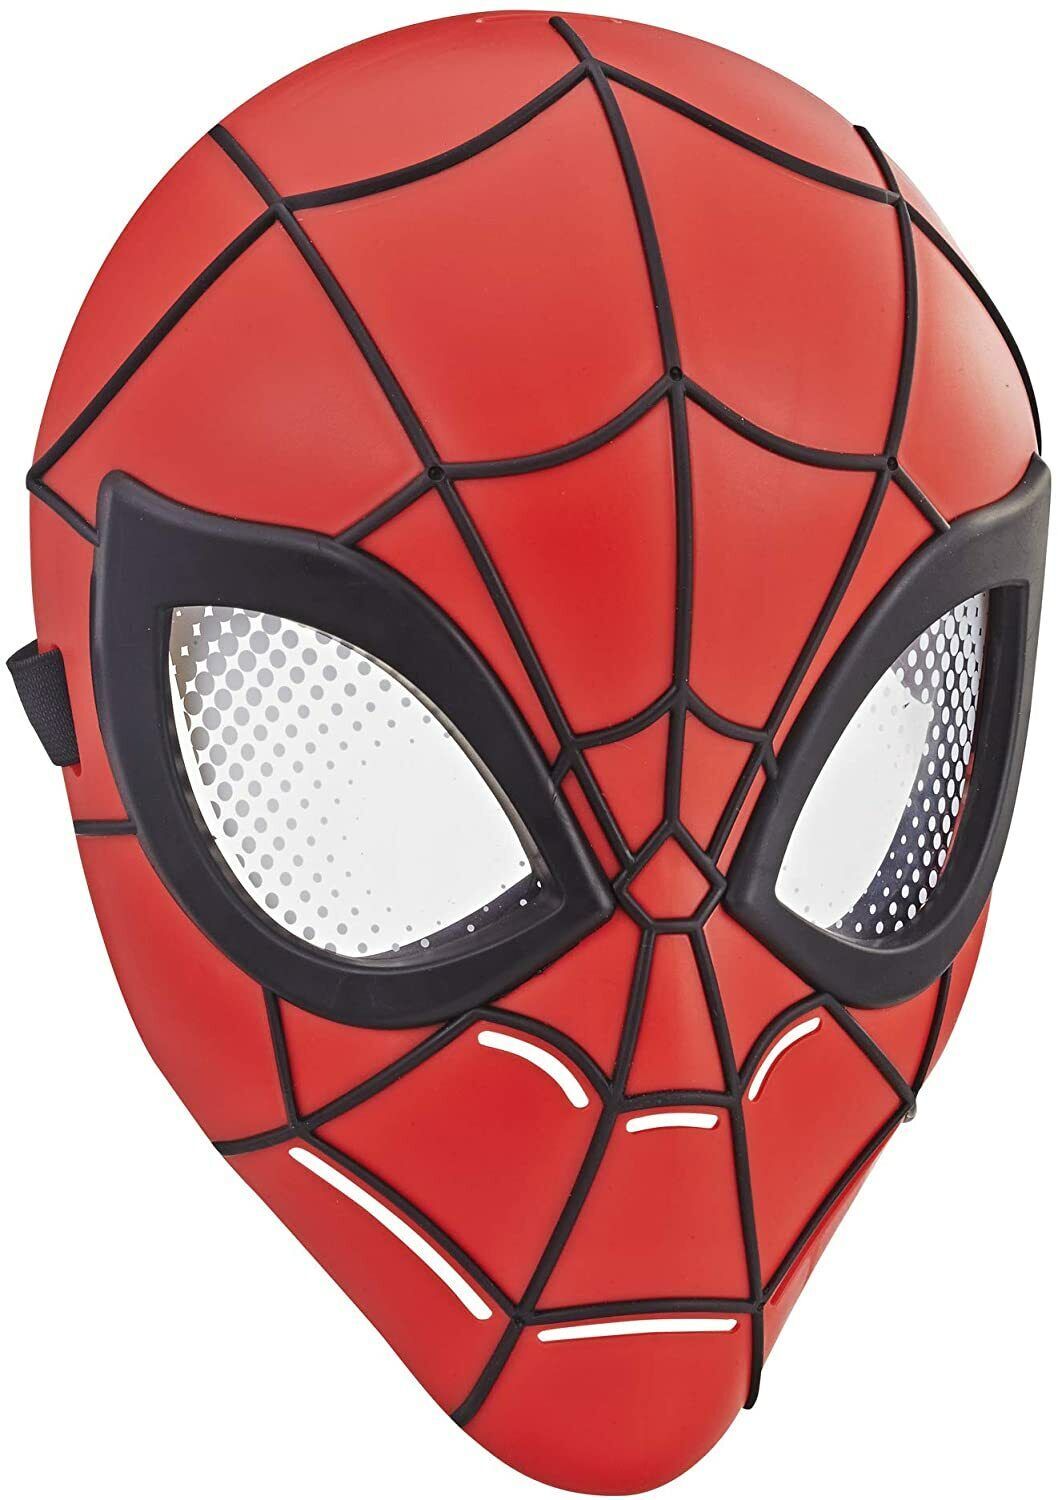 Primary image for Hasbro Marvel - Spider-Man Mask - Toy For Kids Age 5+